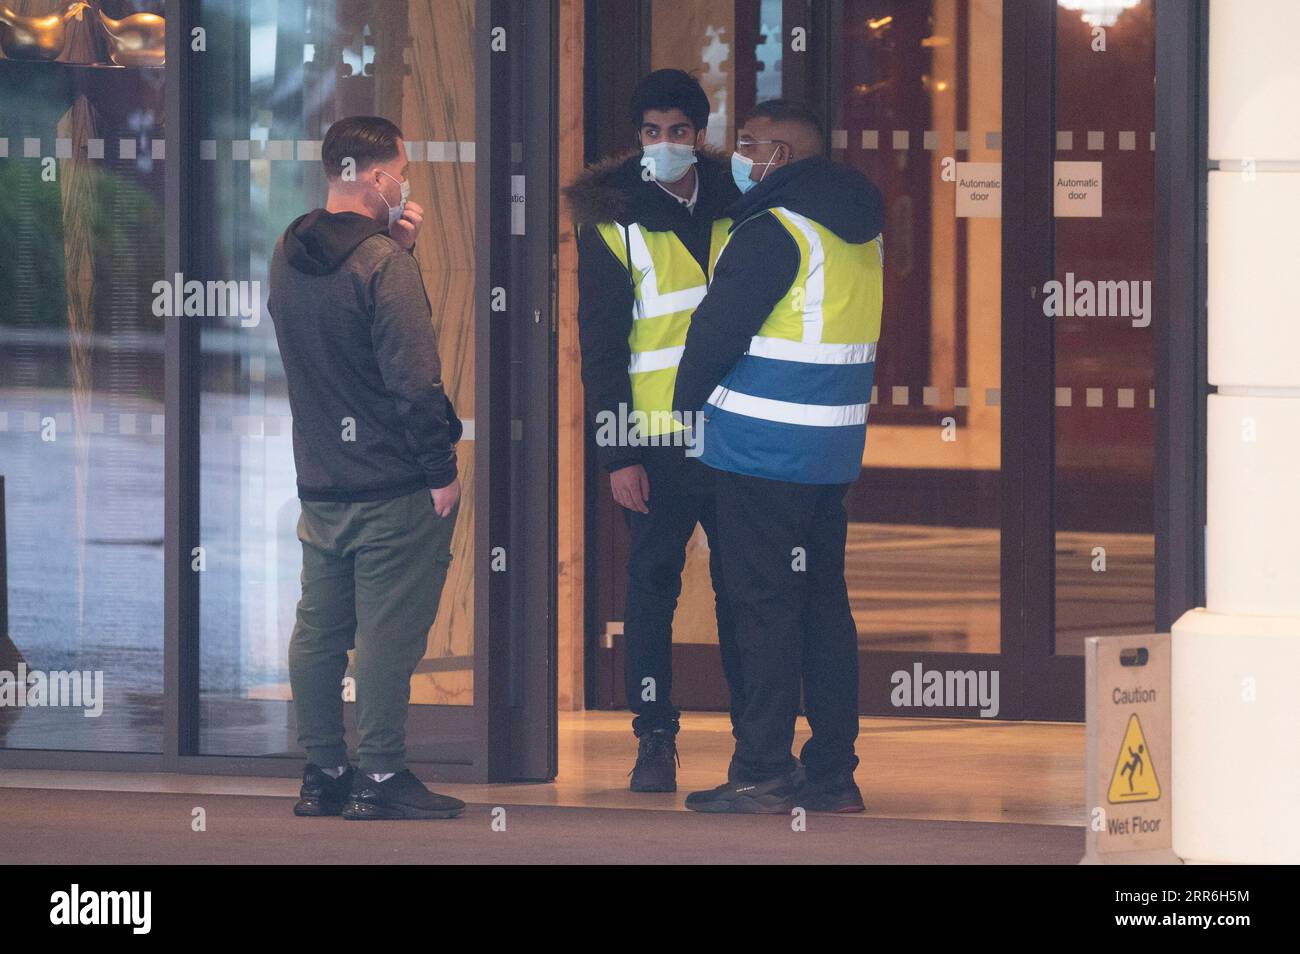 210216 -- LONDON, Feb. 16, 2021 -- Security staff guard the entrance of the Radisson Blu Edwardian Hotel in London, Britain, on Feb. 15, 2021. From Monday, all British and Irish citizens and British residents who arrive in England after being in the red list of more than 30 high-risk countries now have to self-isolate in hotels. The red list countries include South Africa, Portugal and South American nations. Photo by /Xinhua BRITAIN-LONDON-COVID-19-HOTEL QUARANTINE STAY RayxTang PUBLICATIONxNOTxINxCHN Stock Photo